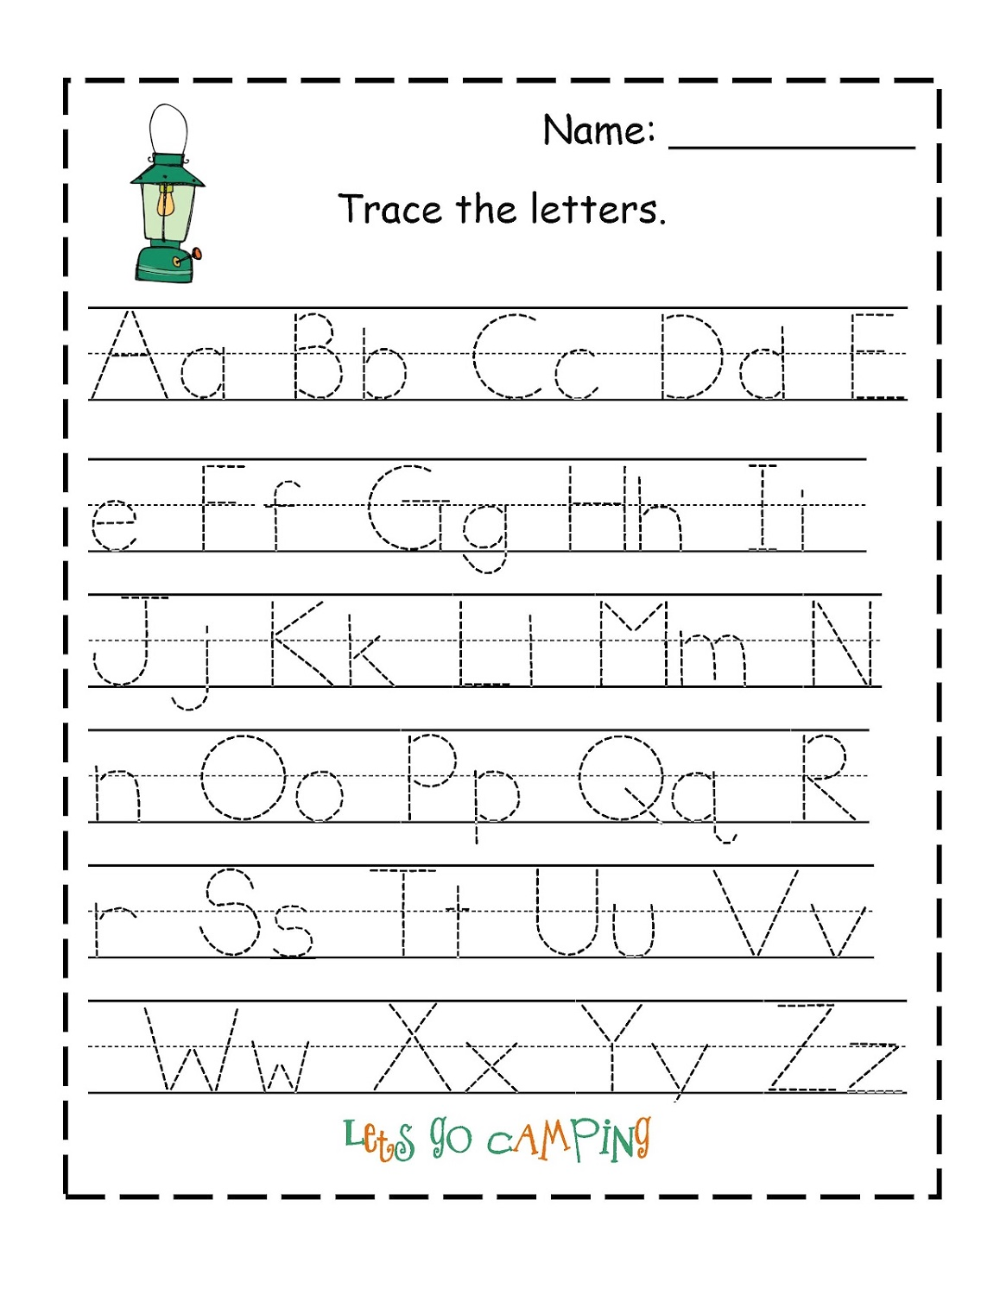 Traceable Alphabet Worksheets A-Z | Handwriting Worksheets with Alphabet Worksheets A-Z Printable